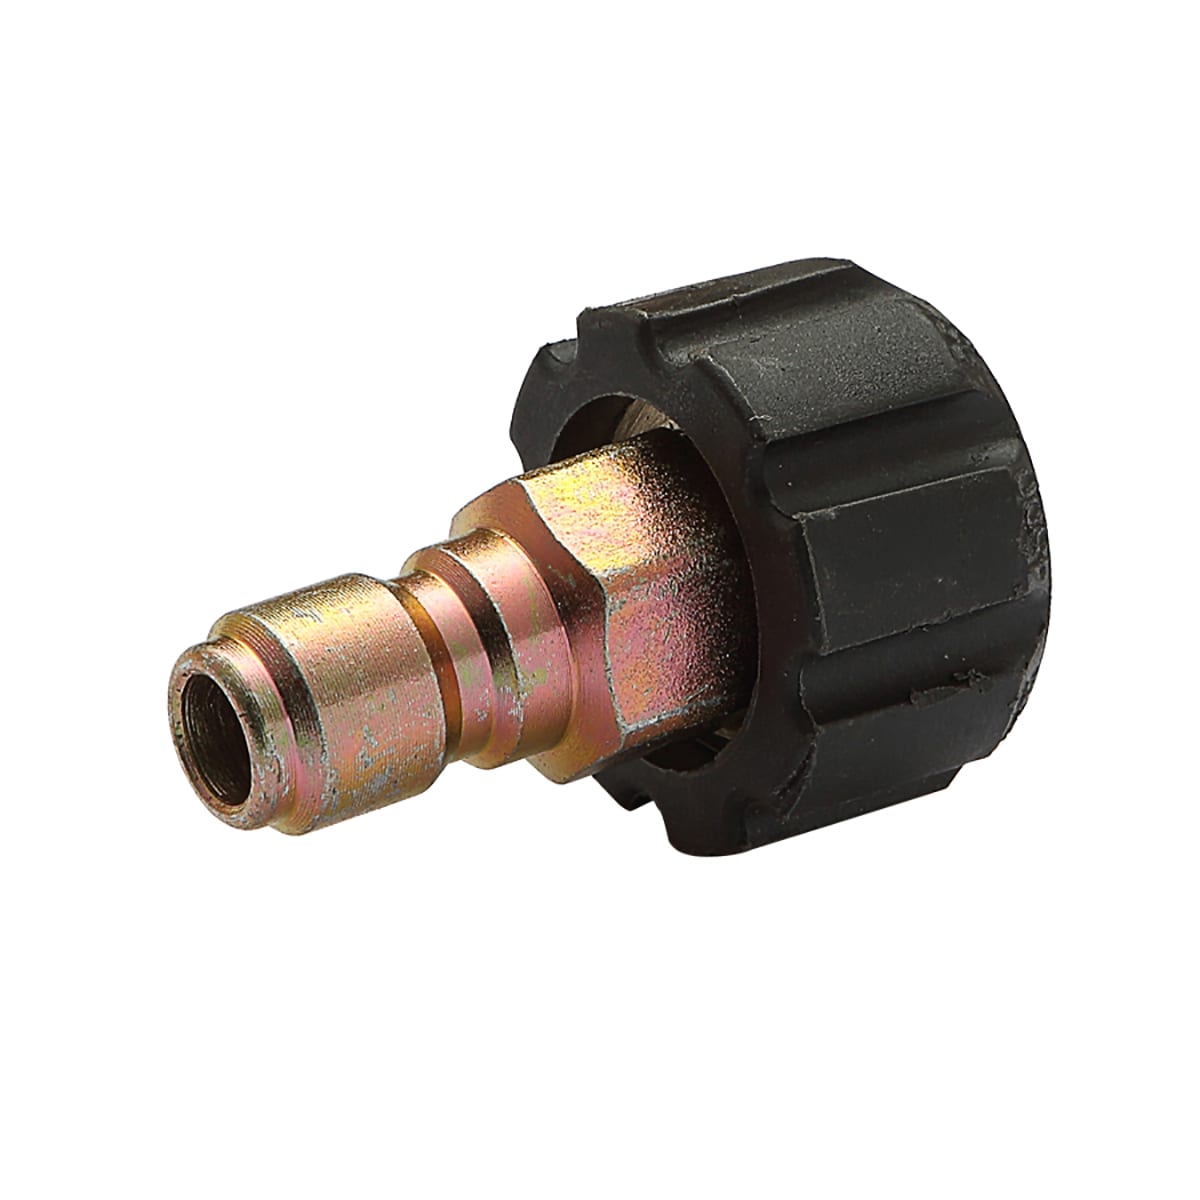 Pressure Washer Twist Type Quick Connector Socket 22mm Attach Hose To Hose 